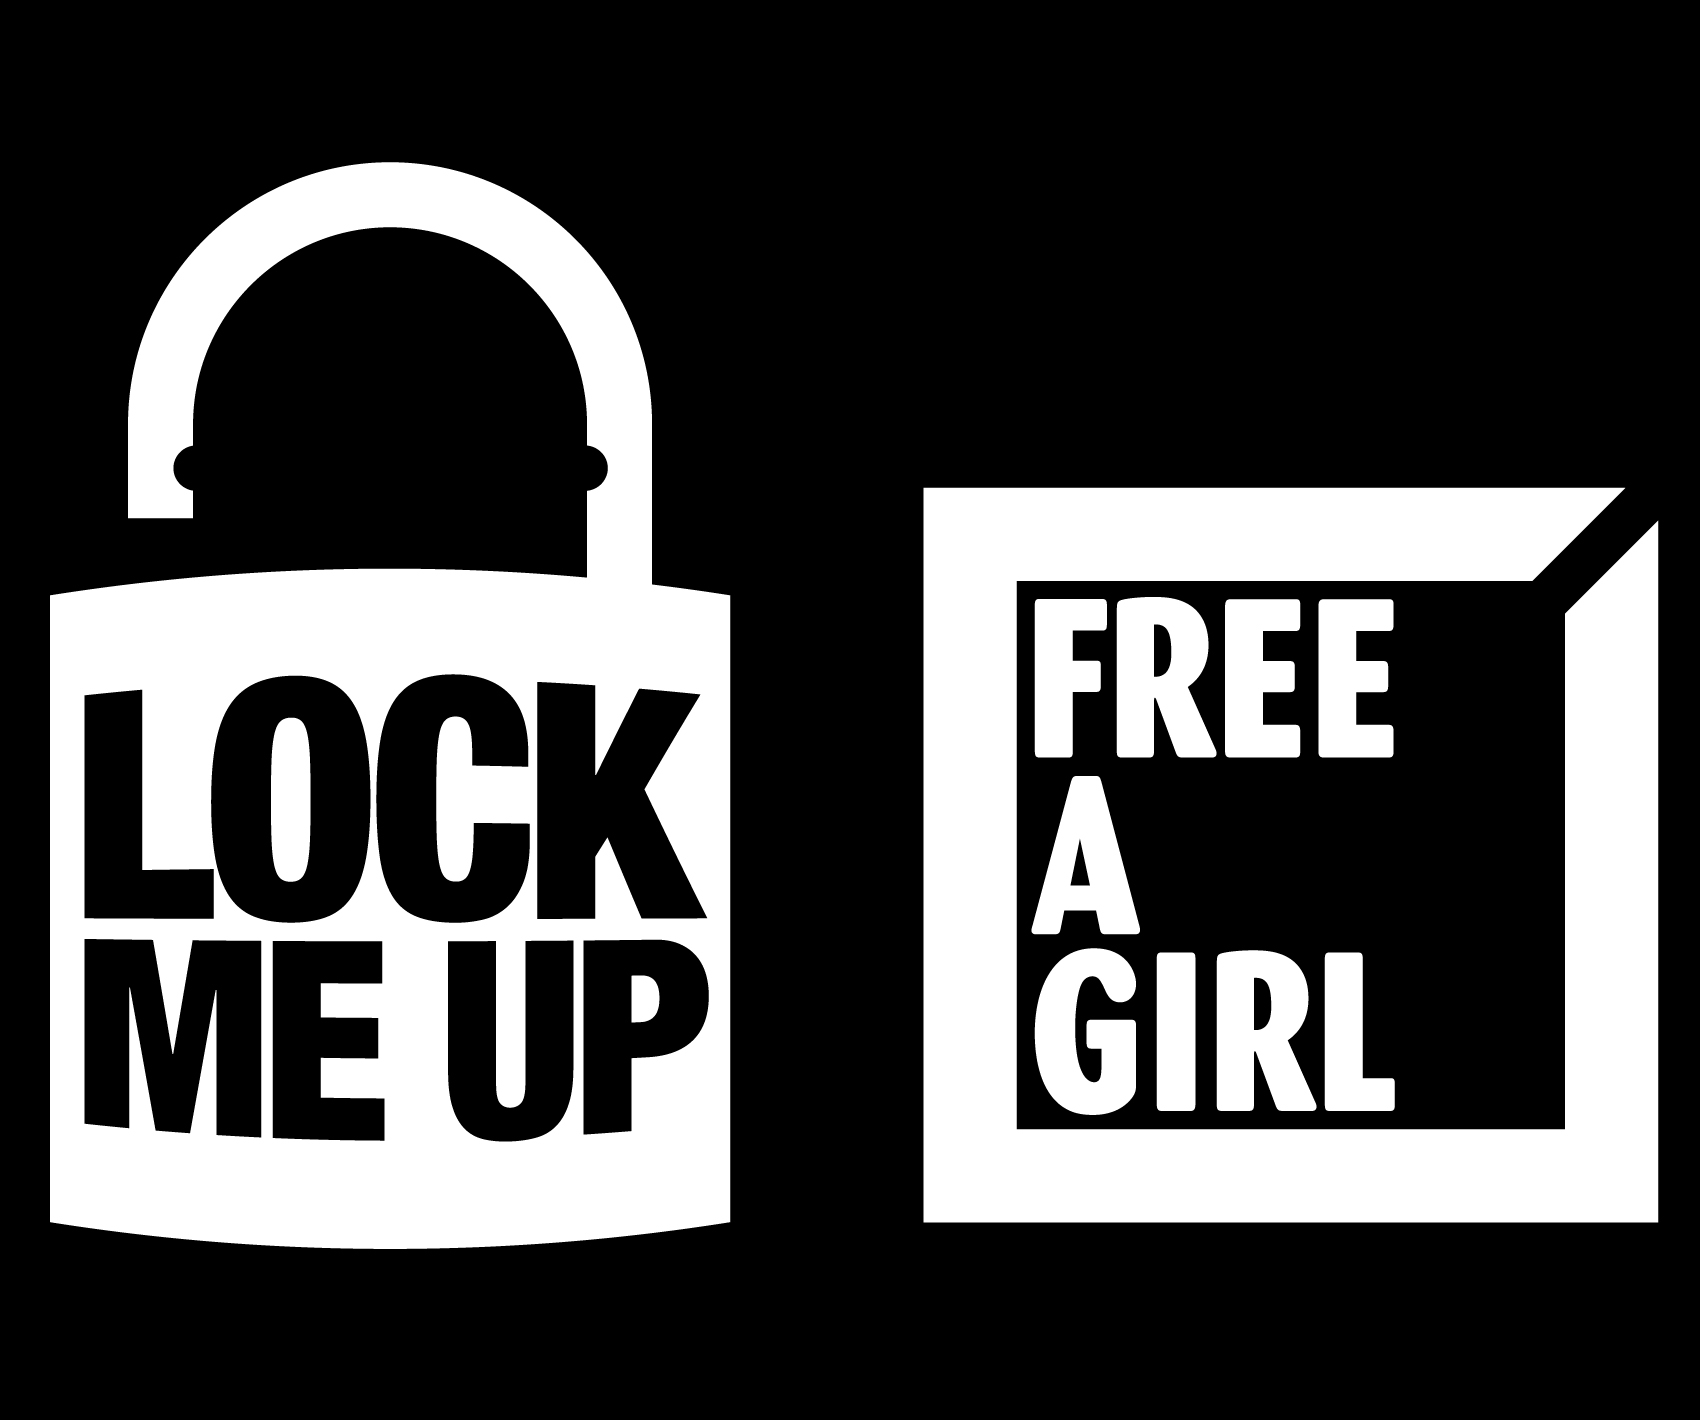 Lock me Up – Free a Girl